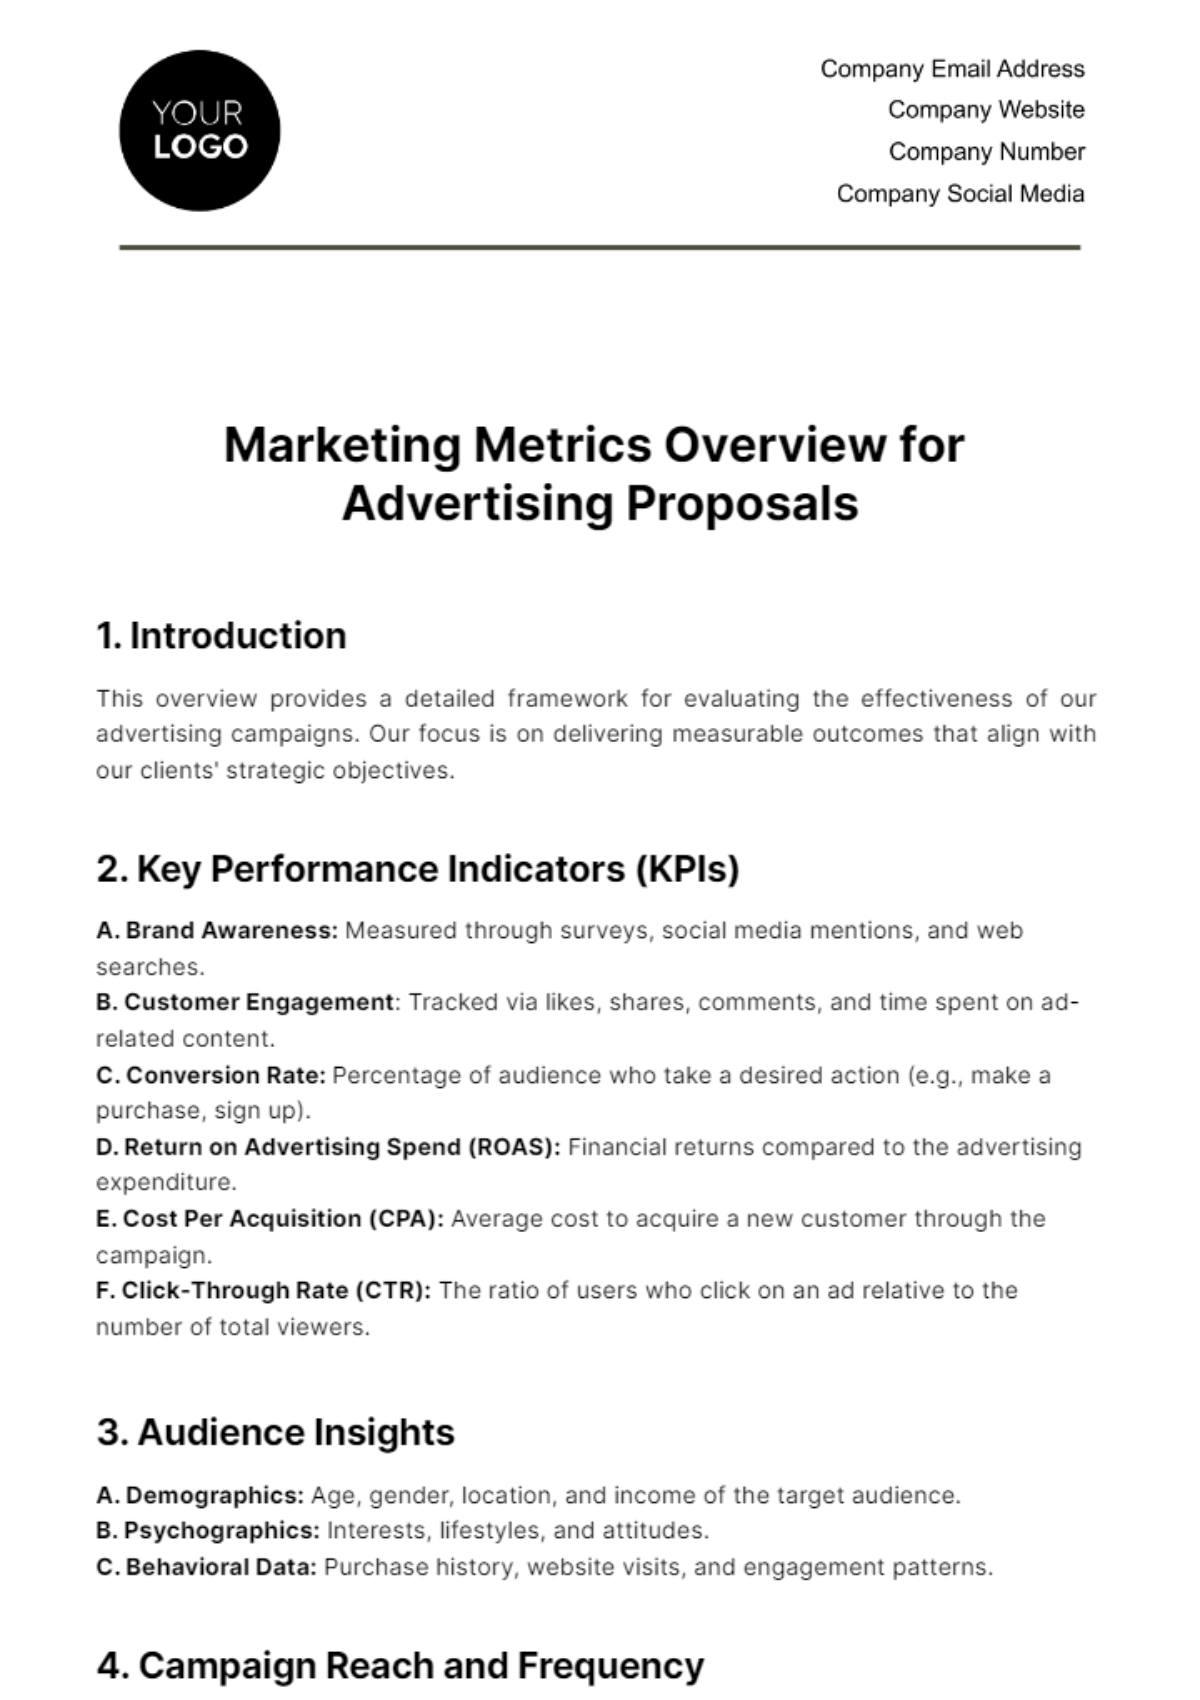 Marketing Metrics Overview for Advertising Proposals Template